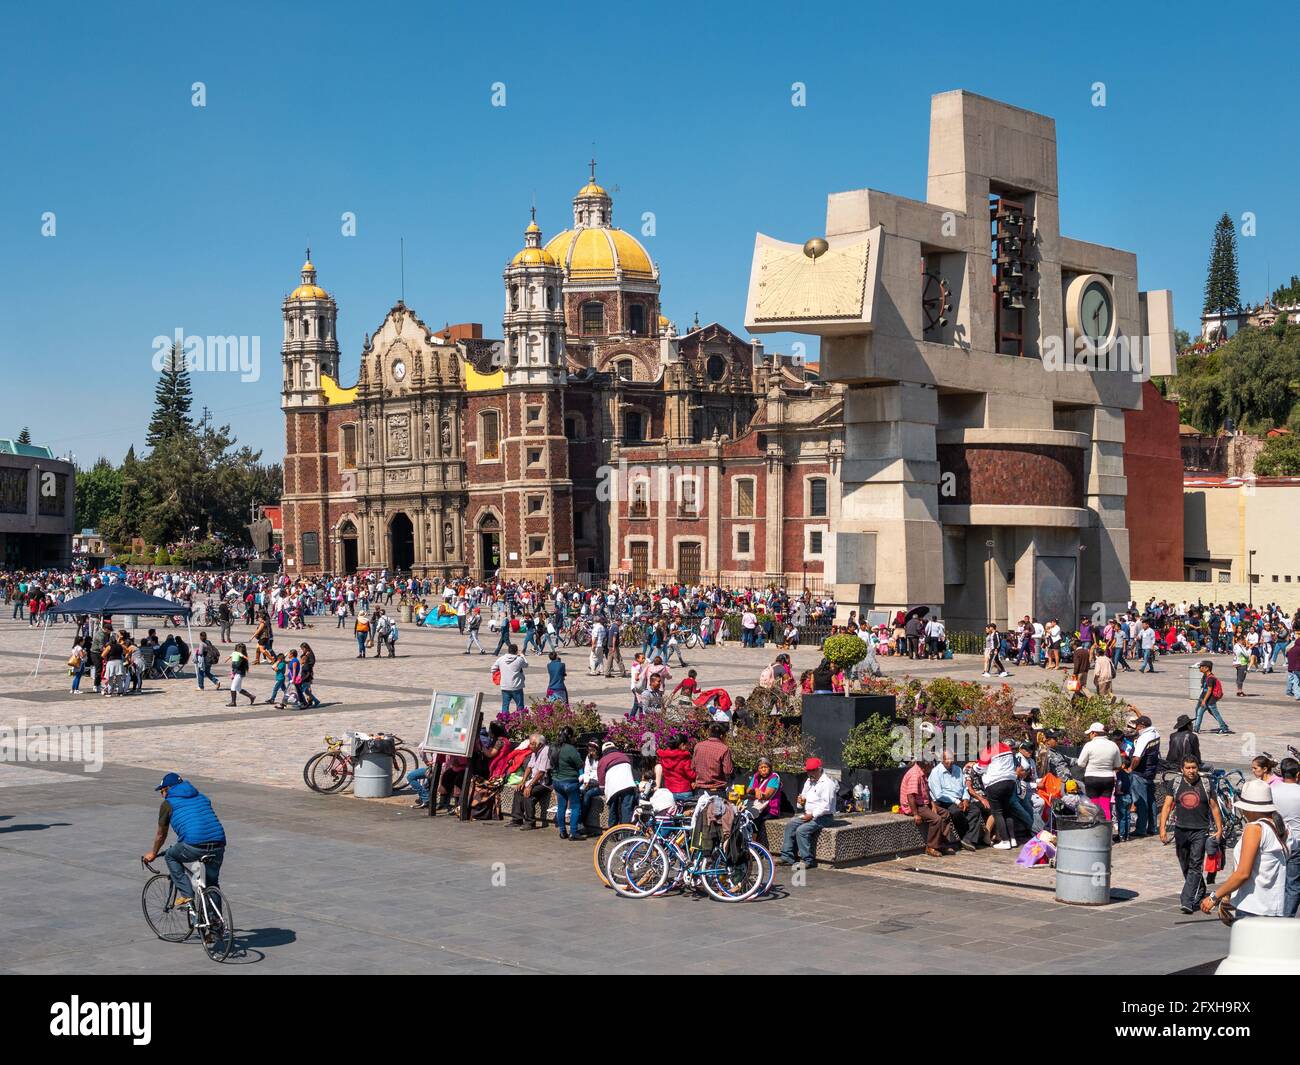 Historical landmark Basilica of Our Lady of Guadalupe on a sunny day in Mexico City, Mexico. Stock Photo